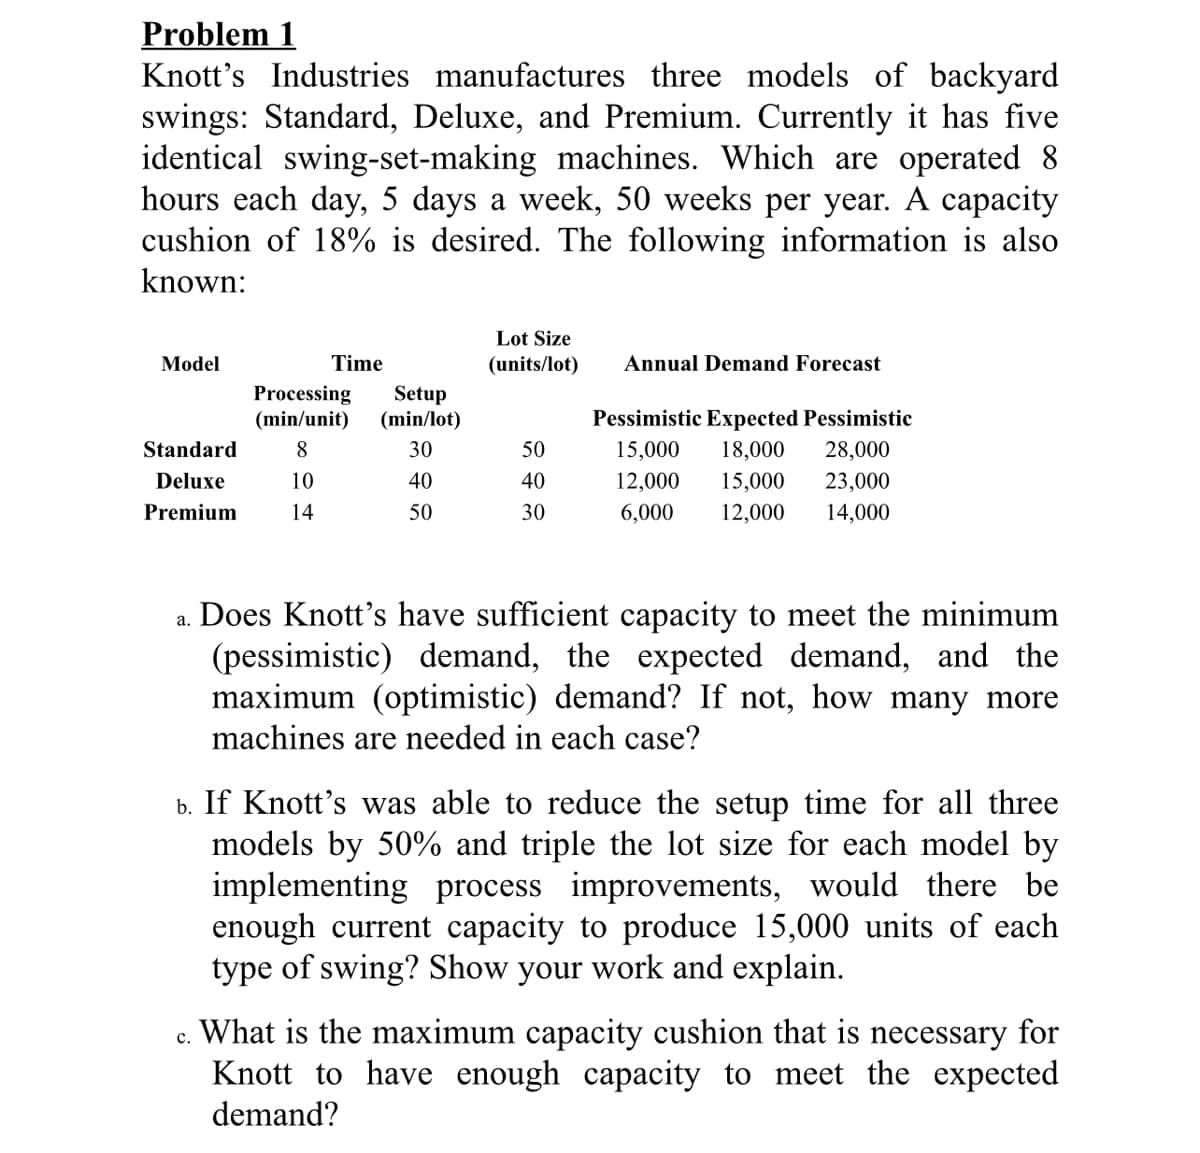 Problem 1
Knott's Industries manufactures three models of backyard
swings: Standard, Deluxe, and Premium. Currently it has five
identical swing-set-making machines. Which are operated 8
hours each day, 5 days a week, 50 weeks per year. A capacity
cushion of 18% is desired. The following information is also
known:
Lot Size
Model
Time
(units/lot)
Annual Demand Forecast
Processing
(min/unit)
Setup
(min/lot)
Pessimistic Expected Pessimistic
18,000
Standard
8.
30
50
15,000
28,000
Deluxe
10
40
40
12,000
15,000
23,000
Premium
14
50
30
6,000
12,000
14,000
a. Does Knott's have sufficient capacity to meet the minimum
(pessimistic) demand, the expected demand, and the
maximum (optimistic) demand? If not, how many more
machines are needed in each case?
b. If Knott's was able to reduce the setup time for all three
models by 50% and triple the lot size for each model by
implementing process improvements, would there be
enough current capacity to produce 15,000 units of each
type of swing? Show your work and explain.
c. What is the maximum capacity cushion that is necessary for
Knott to have enough capacity to meet the expected
demand?
